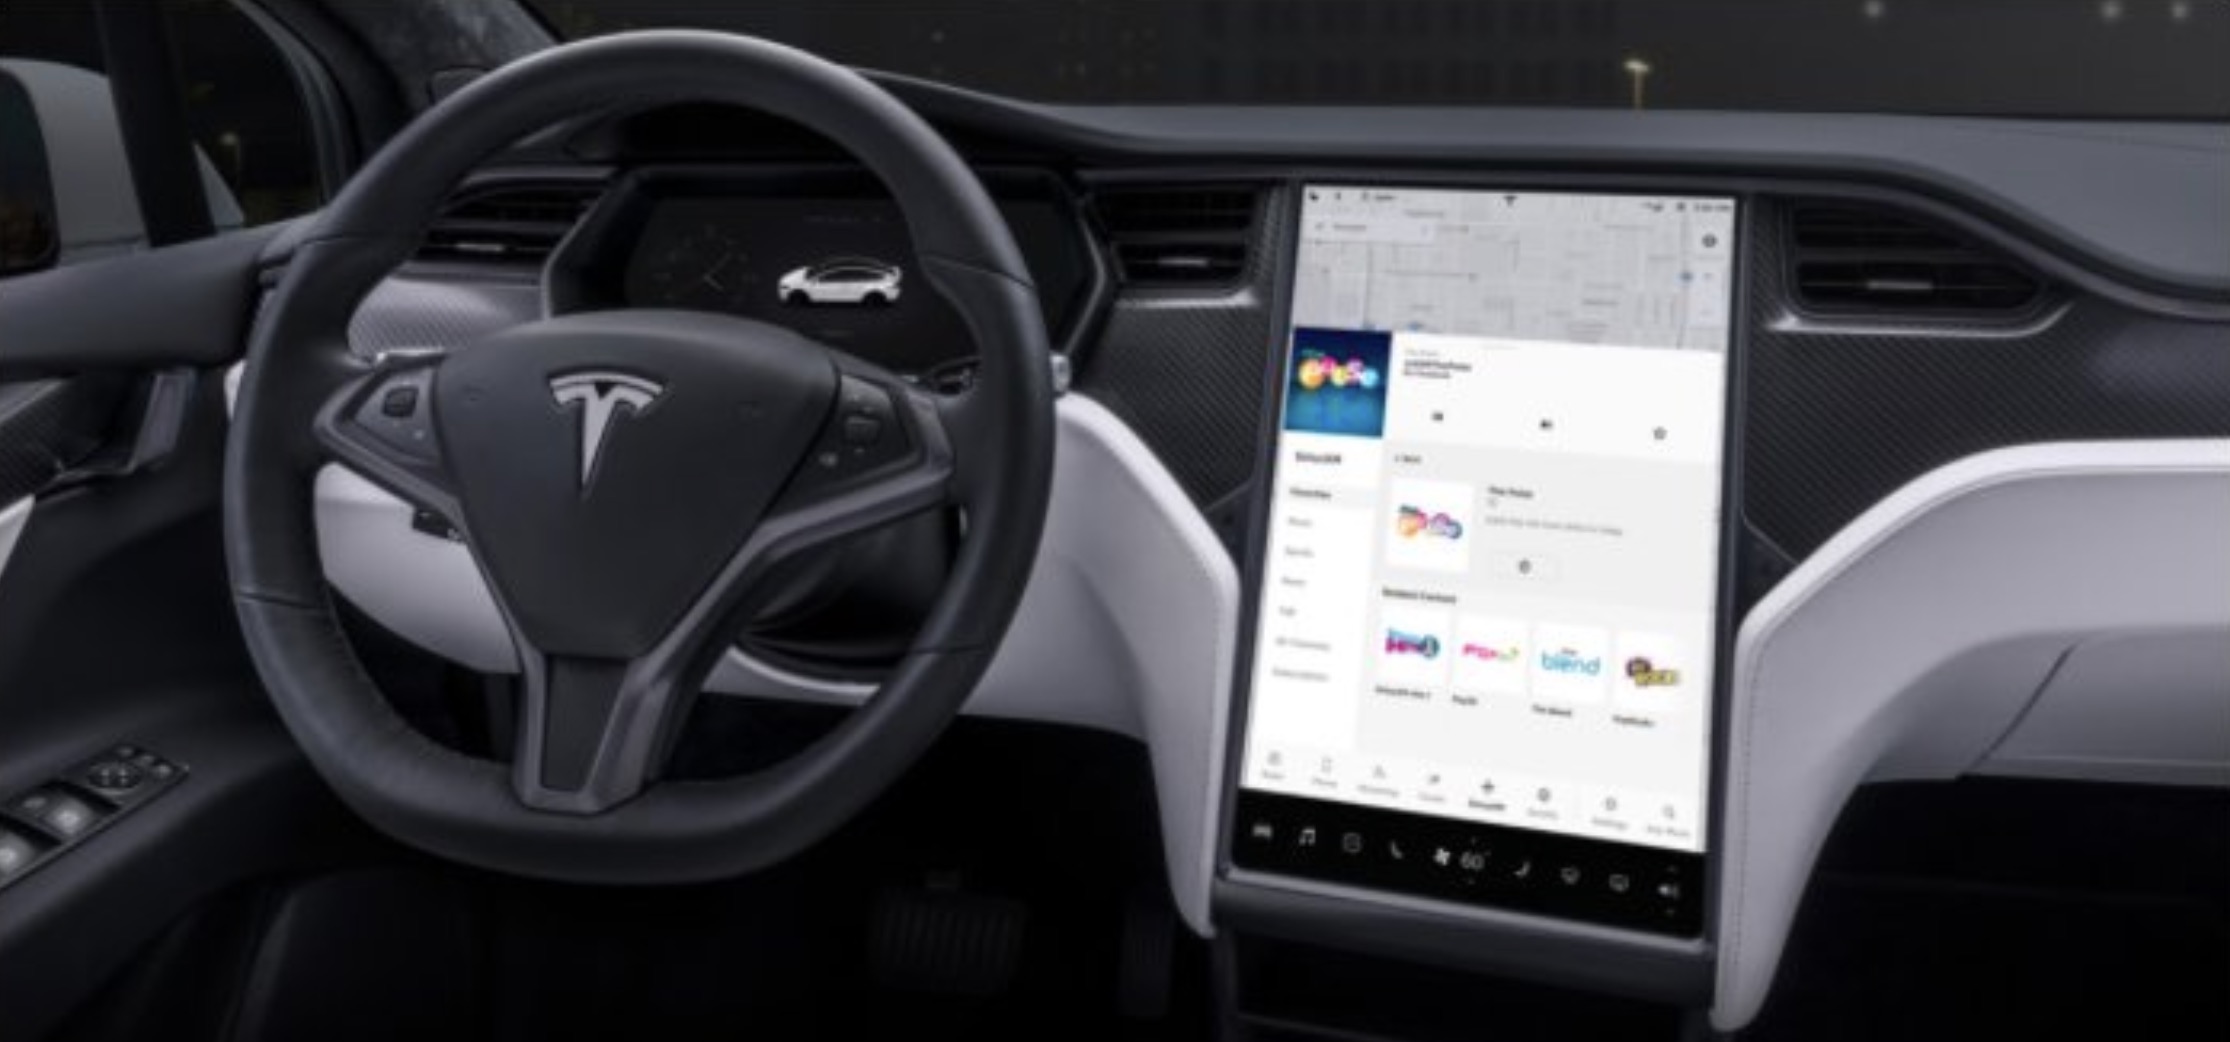 Tesla updates its Sirius XM app and releases 3-month free trial Electrek